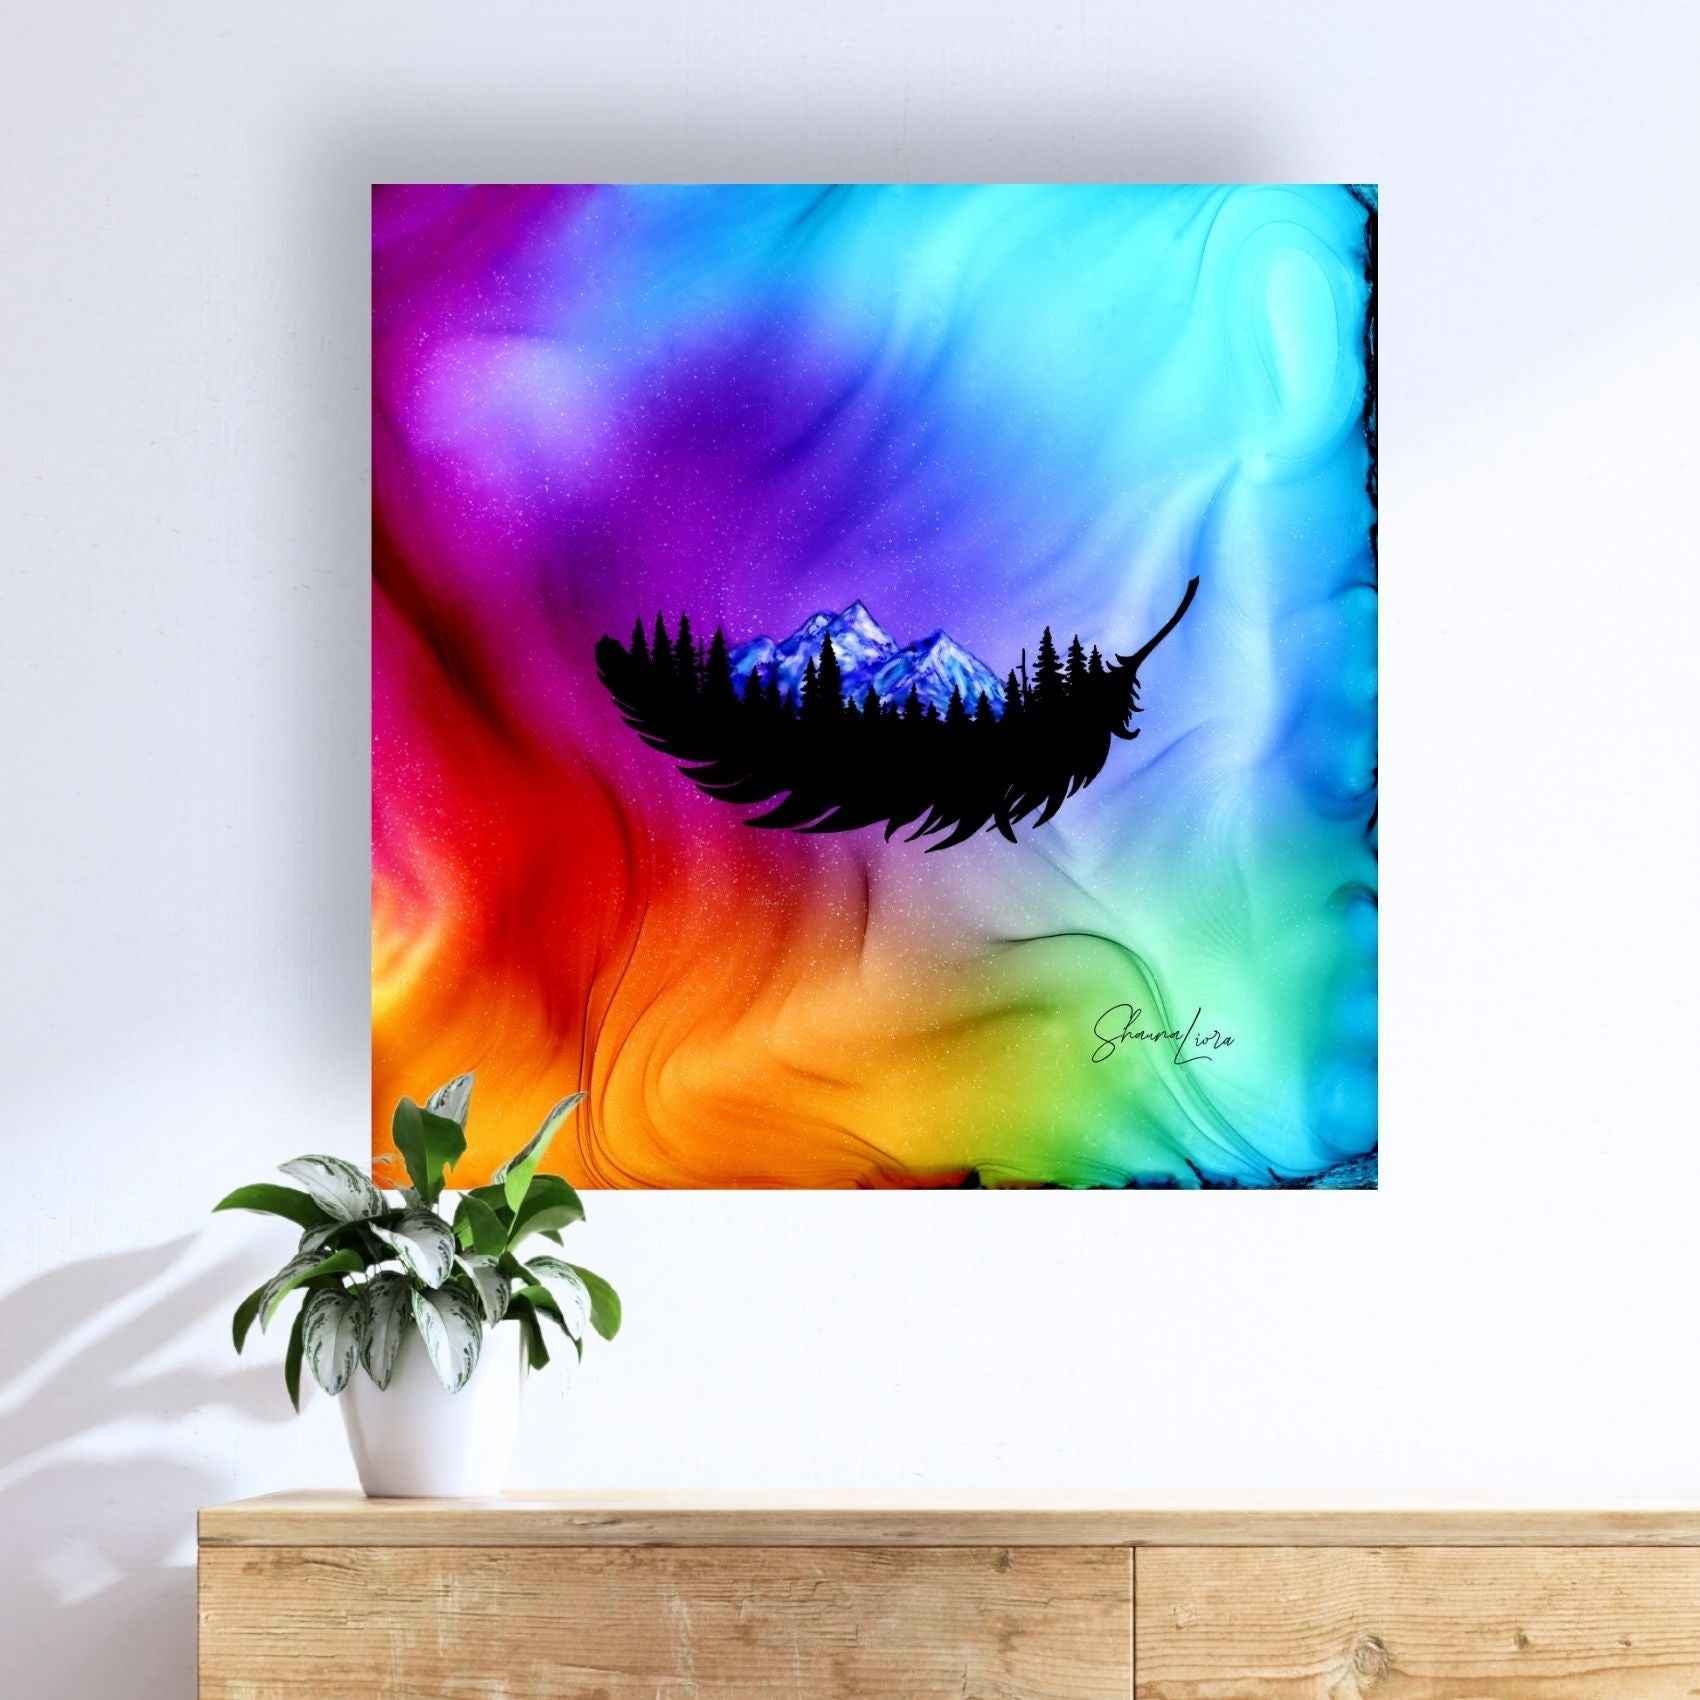 Floating Free - Fire Made Art Print